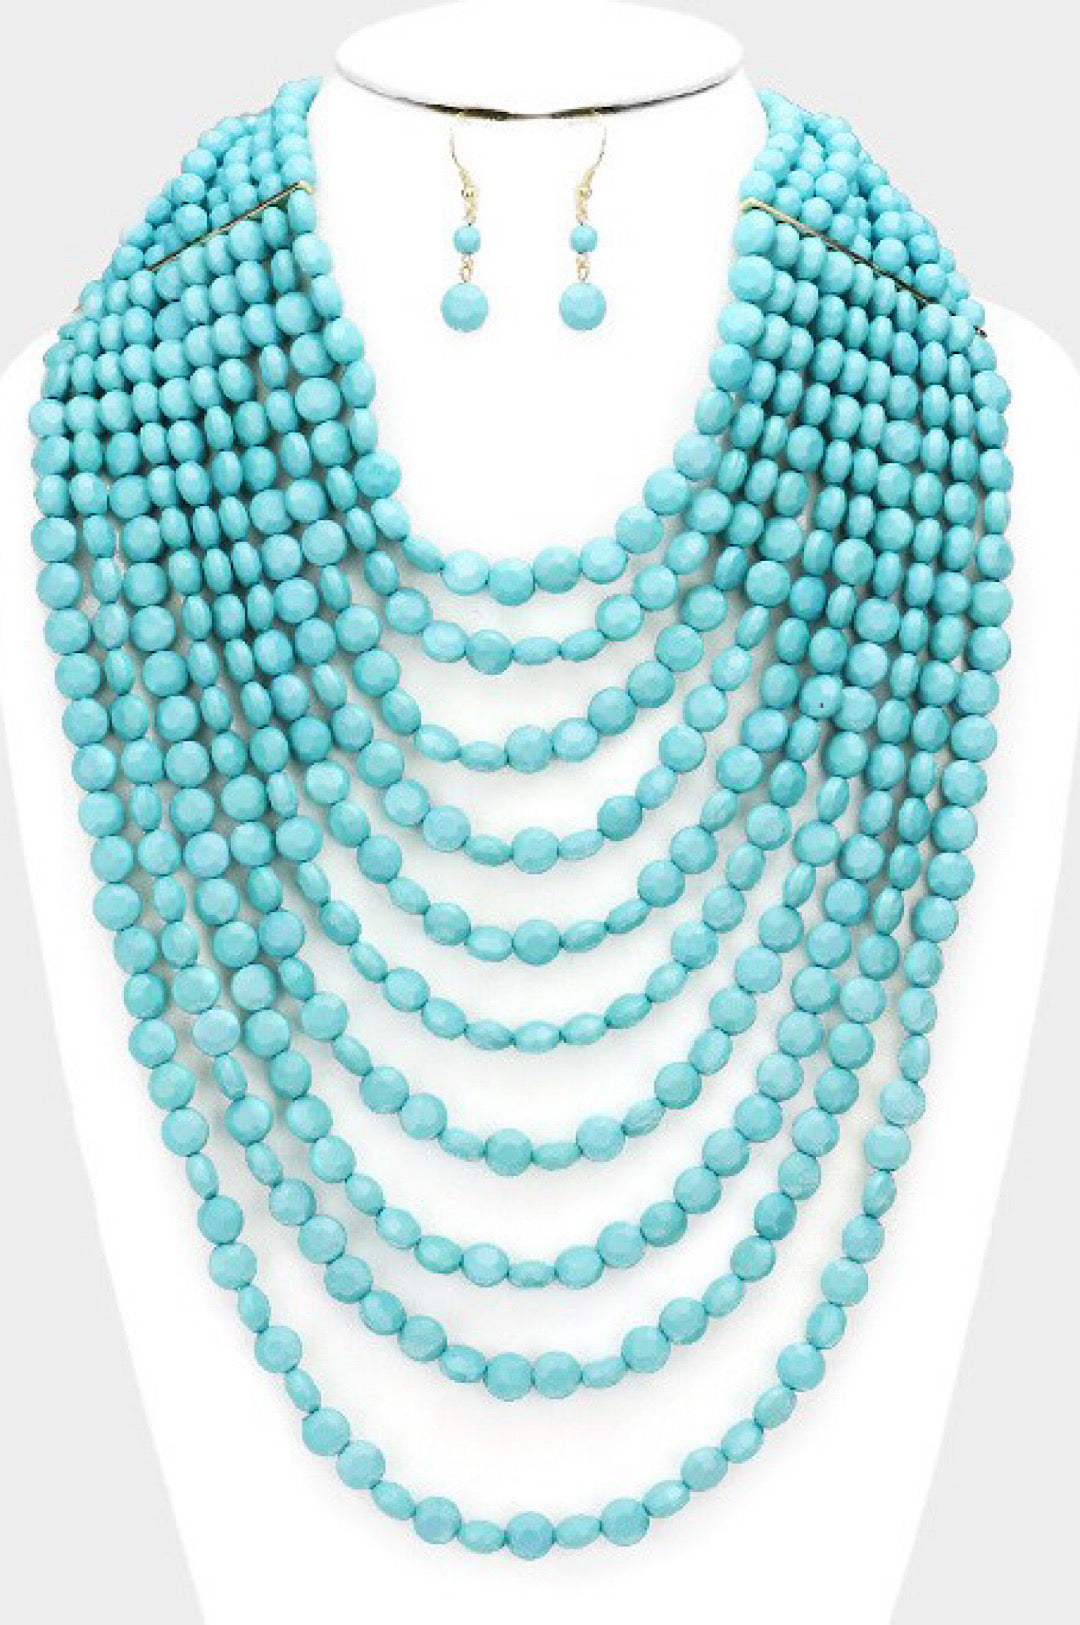 Copy of Three Strand Pearl Necklace (7989984329902)